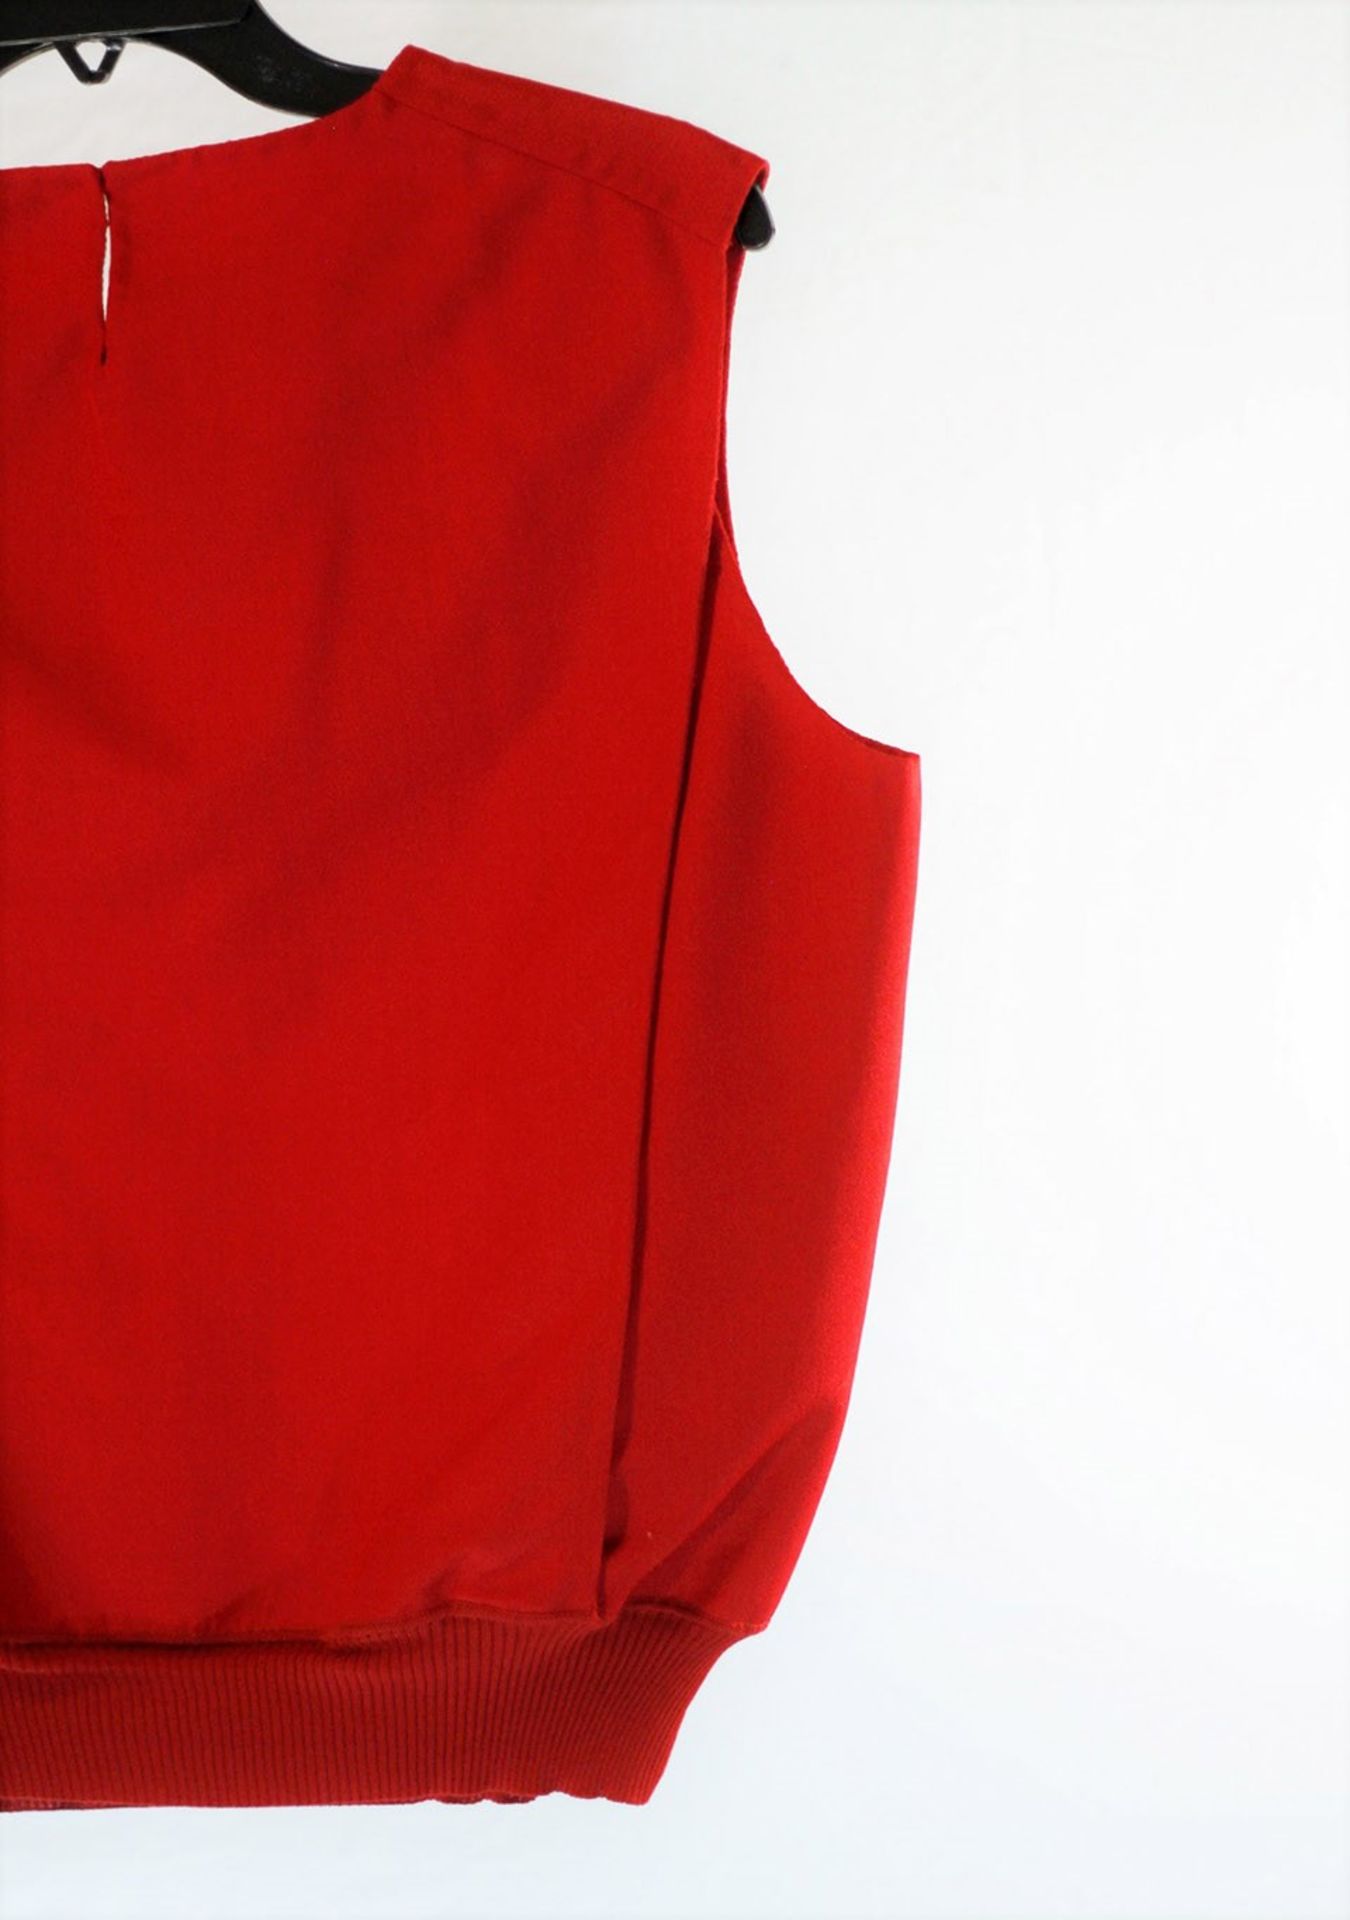 1 x Agnona Red Vest - Size: 18 - Material: 50% Cotton, 28% Mohair, 18% Silk, 4% Wool. Details 55% - Image 7 of 8